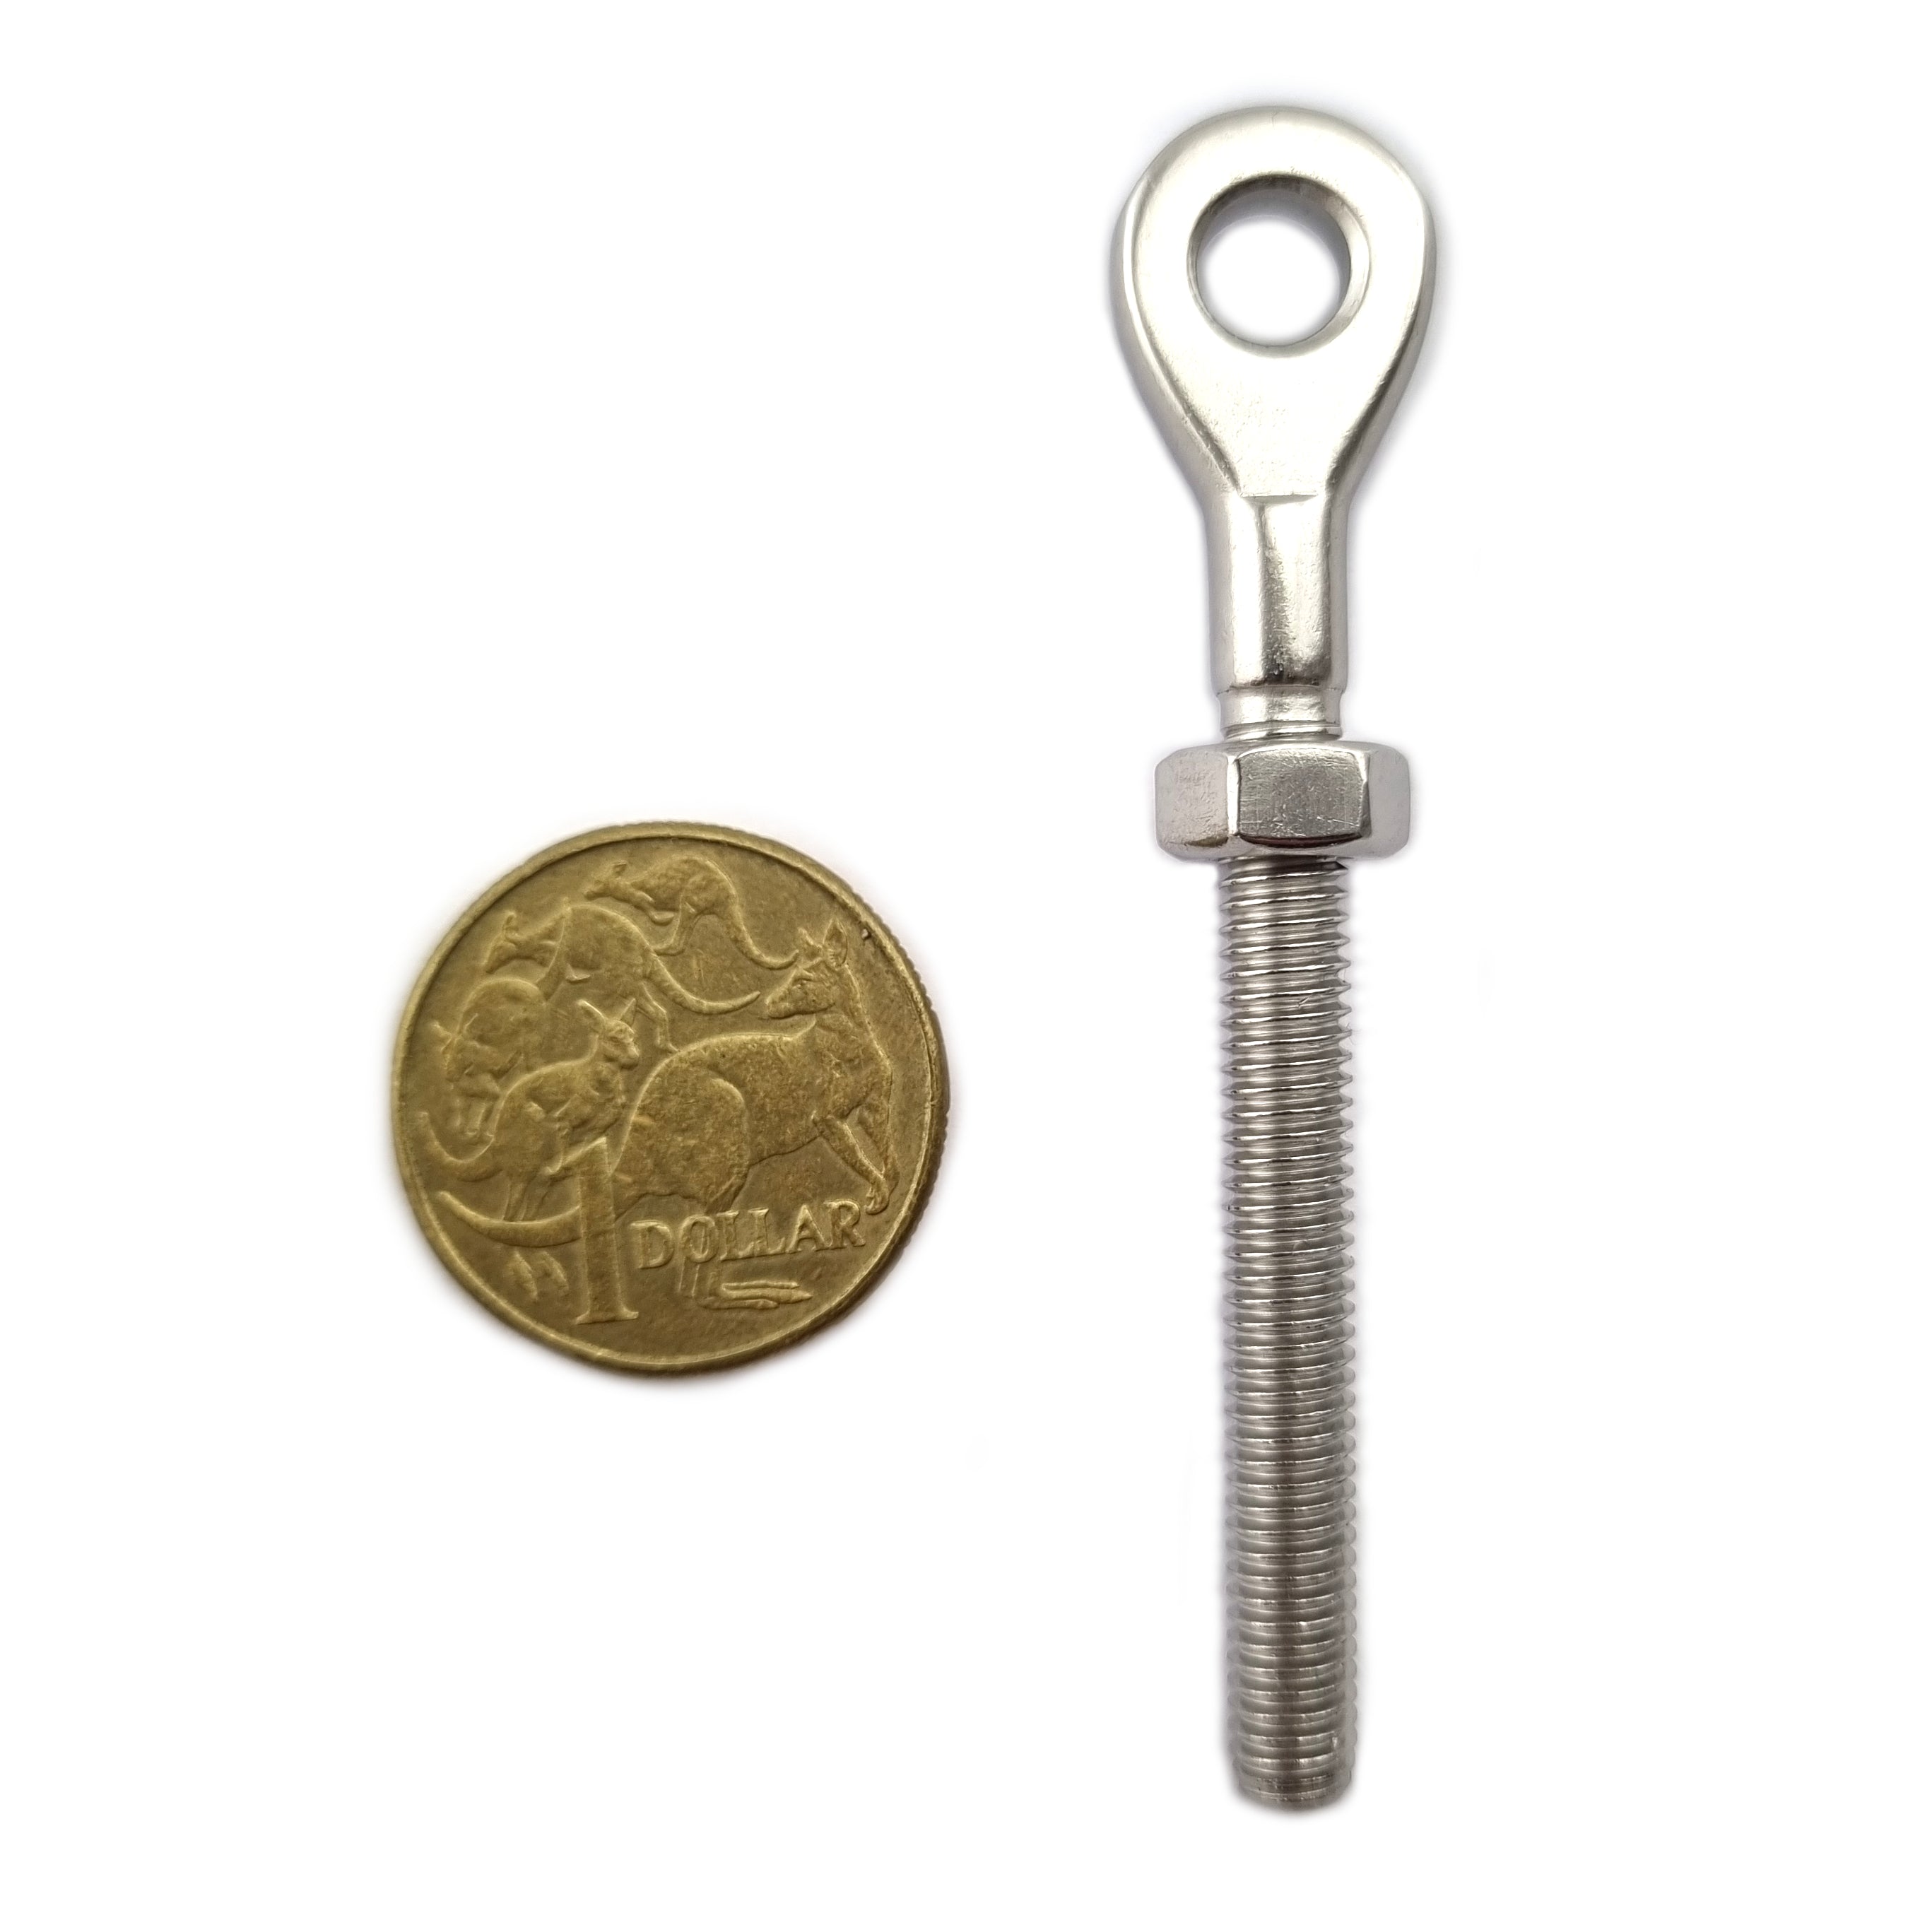 6mm Eye Terminal, Stainless Steel with a 47mm thread. Shop chain.com.au